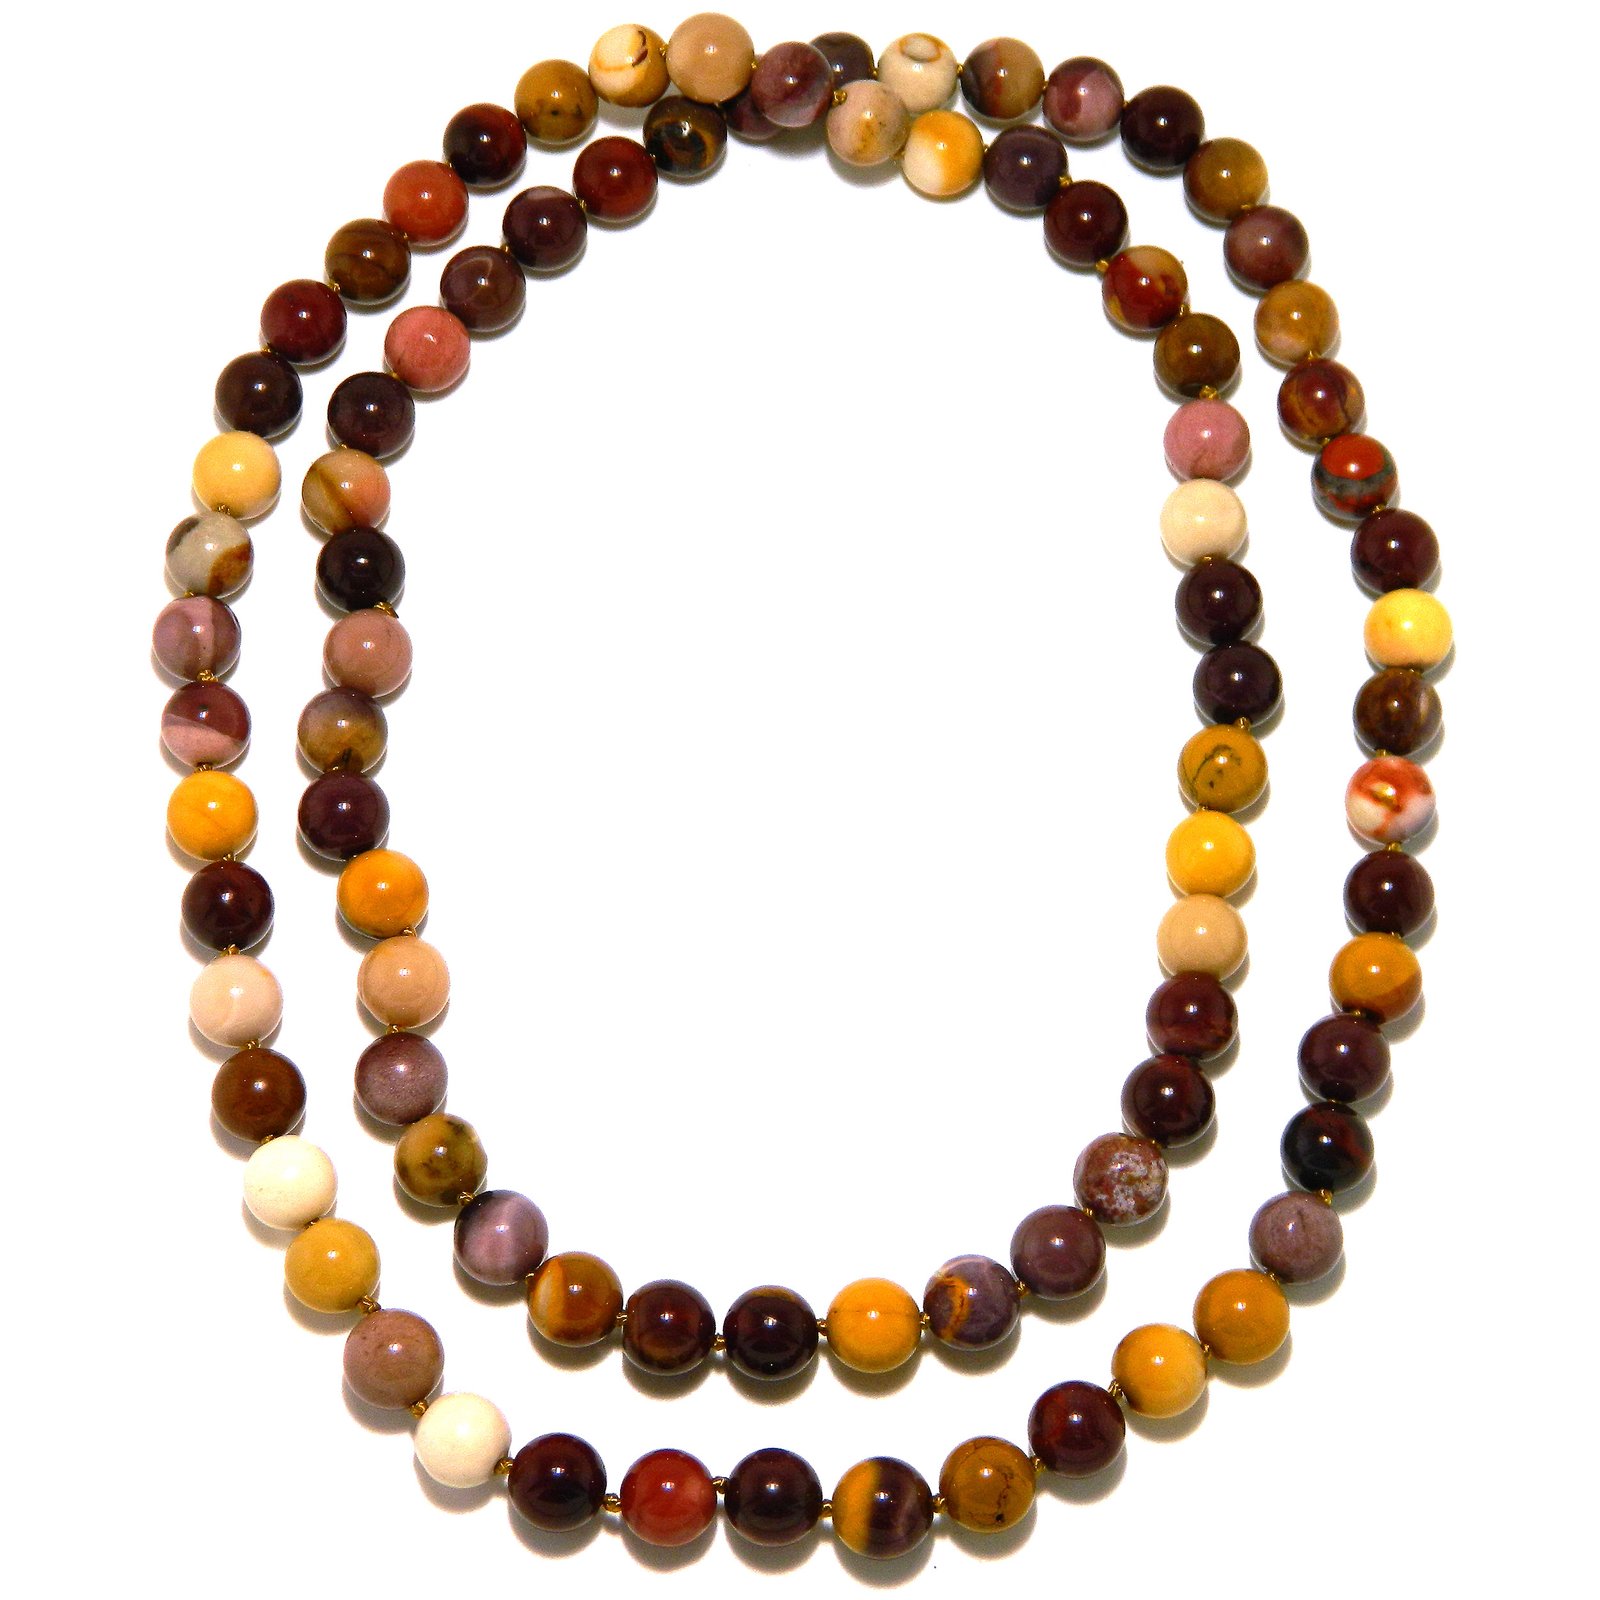 Pearlz Ocean Mookaite Knotted Endless Necklace